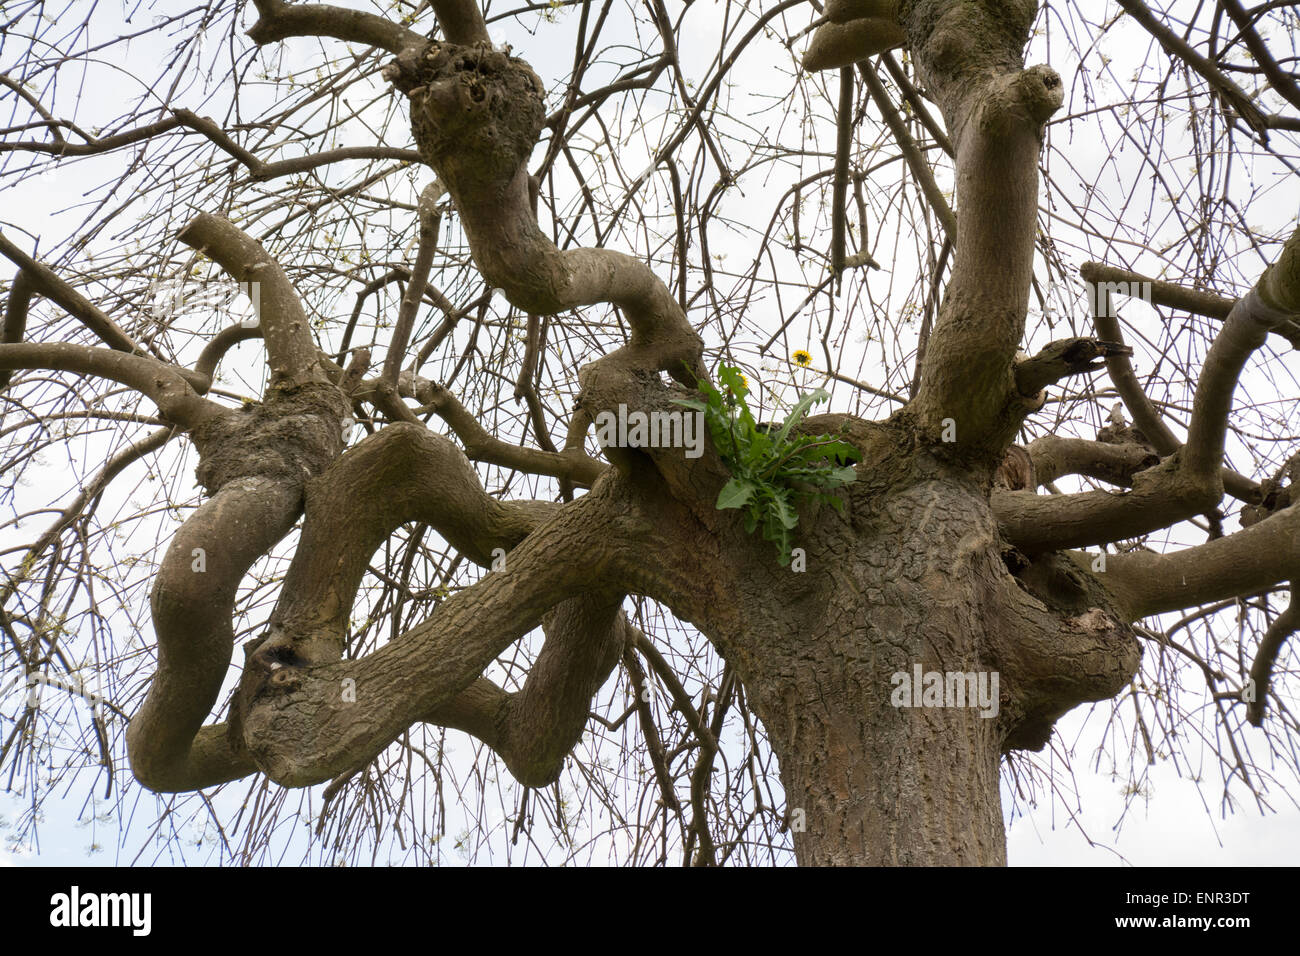 The Dandelion - Taraxacum officinale - growing high up in tree in spring Stock Photo